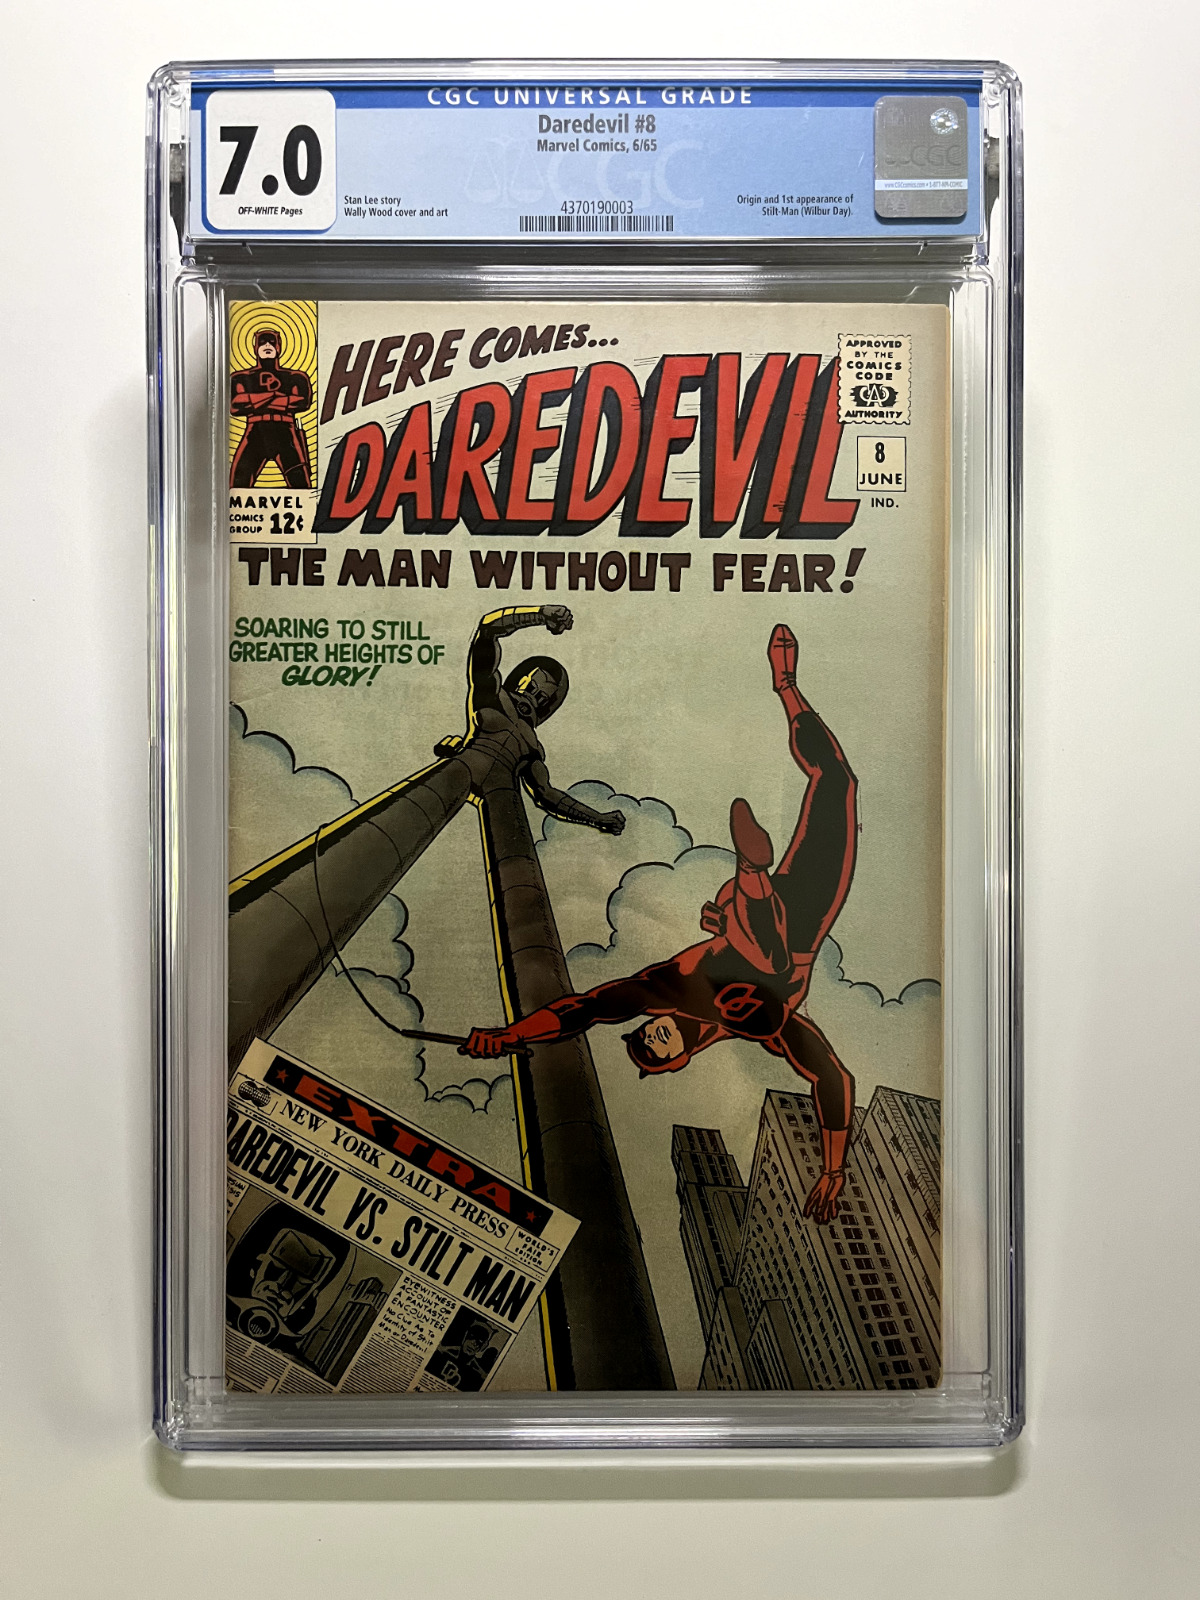 Daredevil #8 CGC 7.0 (1965 Silver Age Marvel Comics) Wally Wood Cover & Art